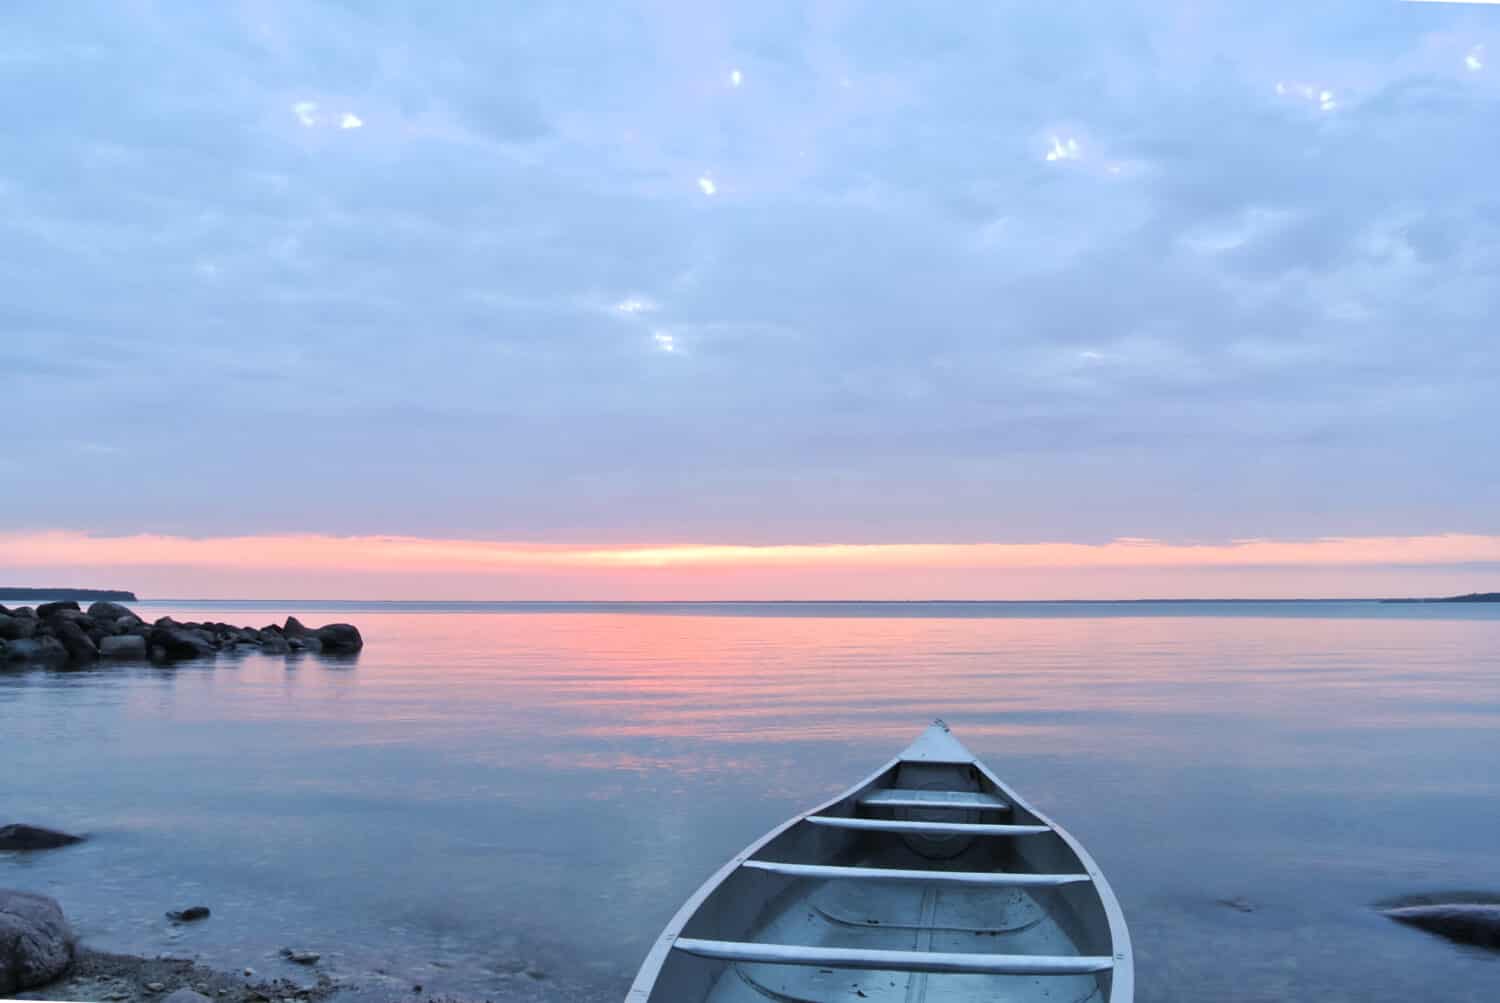 Tip of the canoe pointing out into the water toward the sunset, Hecla Island, Lake Winnipeg, Manitoba